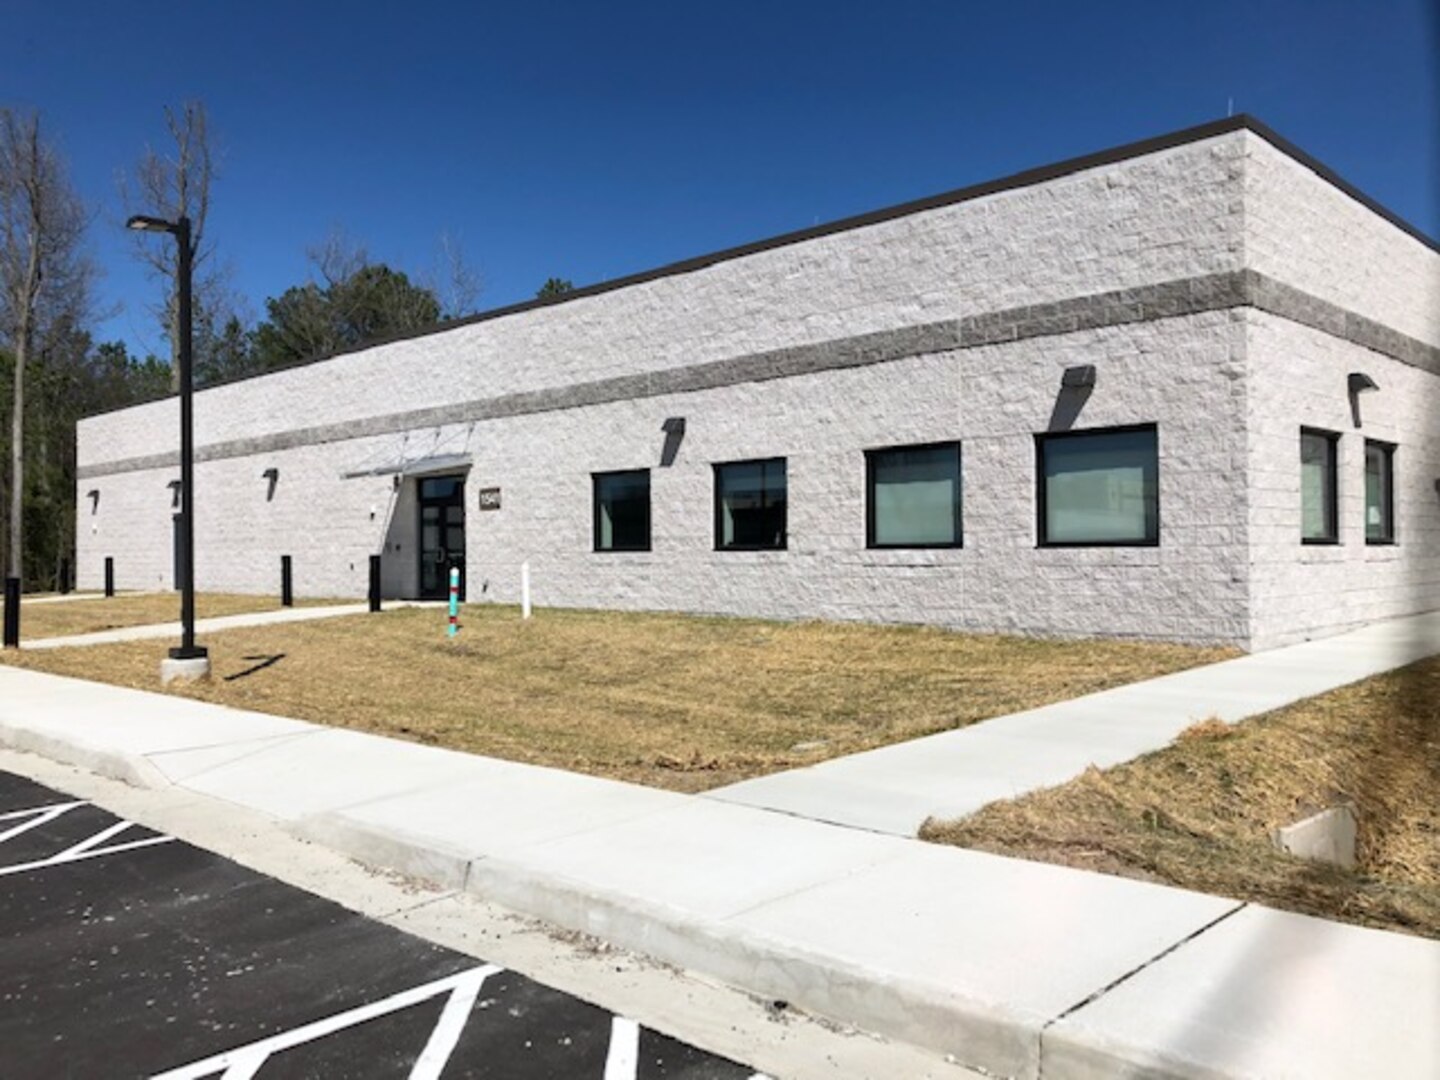 IMAGE: The Electromagnetic Environment Effects Assessment and Support Facility constructed in 2019. The new facility is part of an effort to create spaces that support the new capabilities Naval Surface Warfare Center Dahlgren Division is delivering to the warfighter.